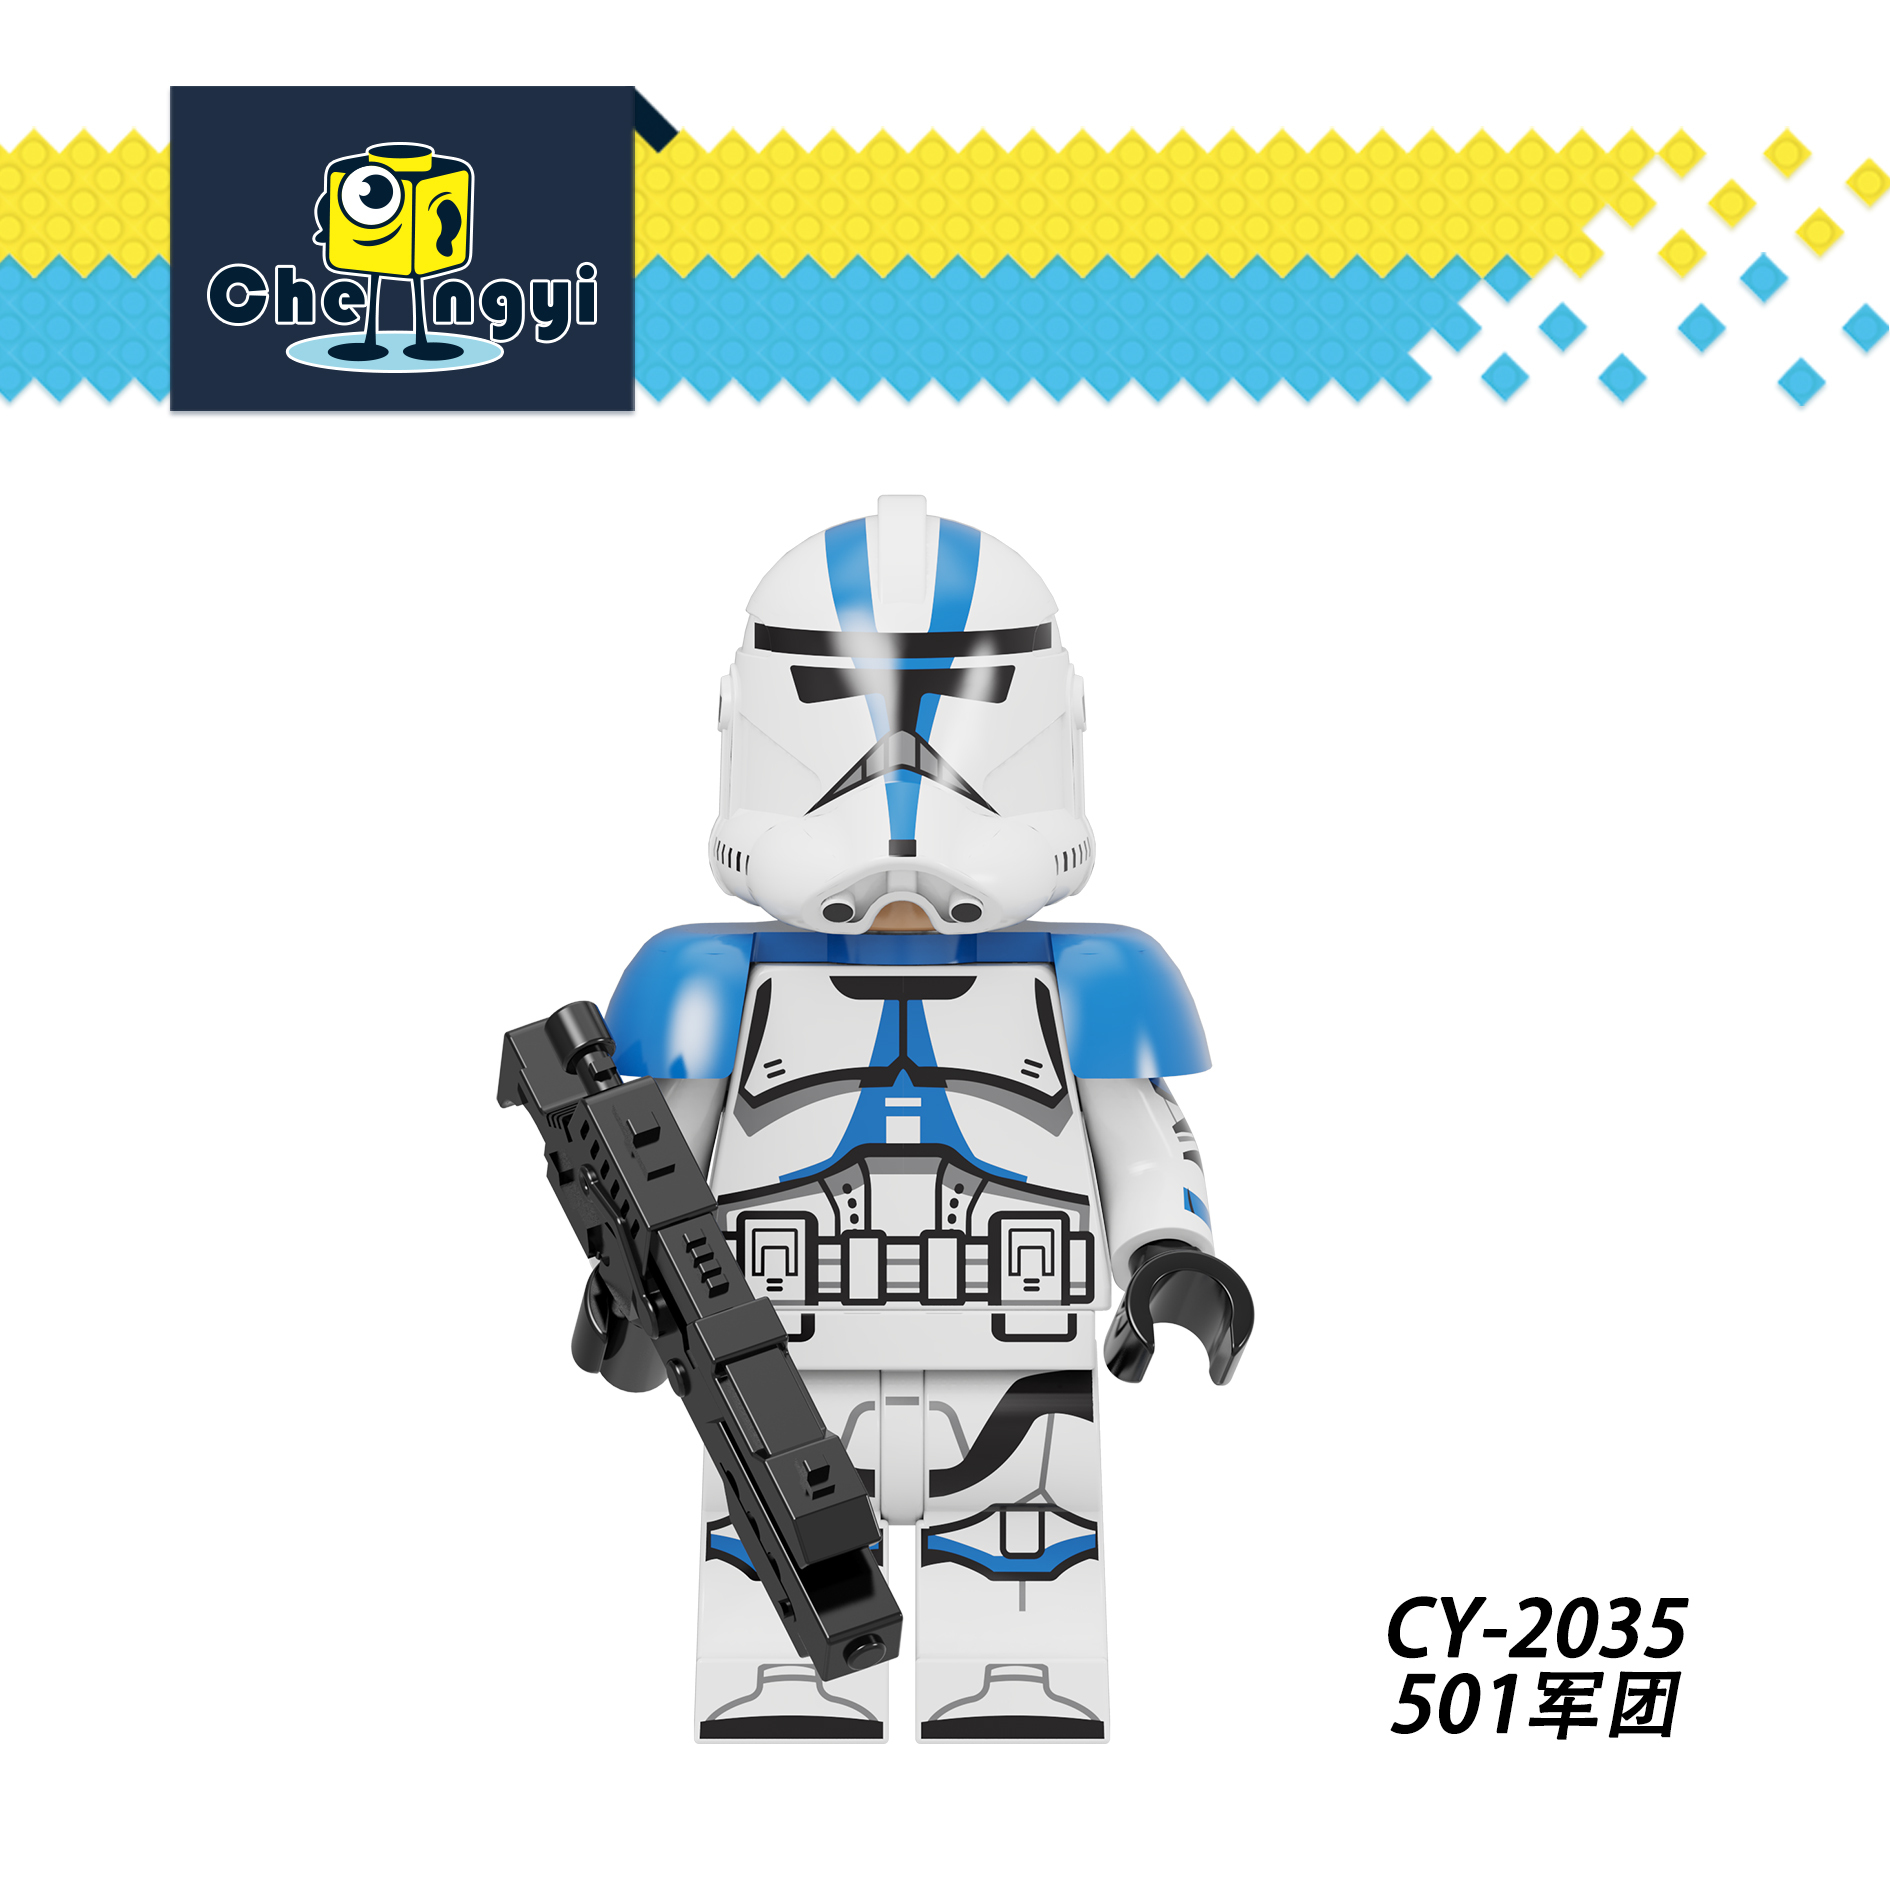 CY2031 CY2032 CY2033 CY2034 CY2035 CY2036 CY2037 CY2038 CY8005 Star Wars Storm Strooper Building Blocks Bricks Movie Series Action Educational Toys for Kids Gifts 